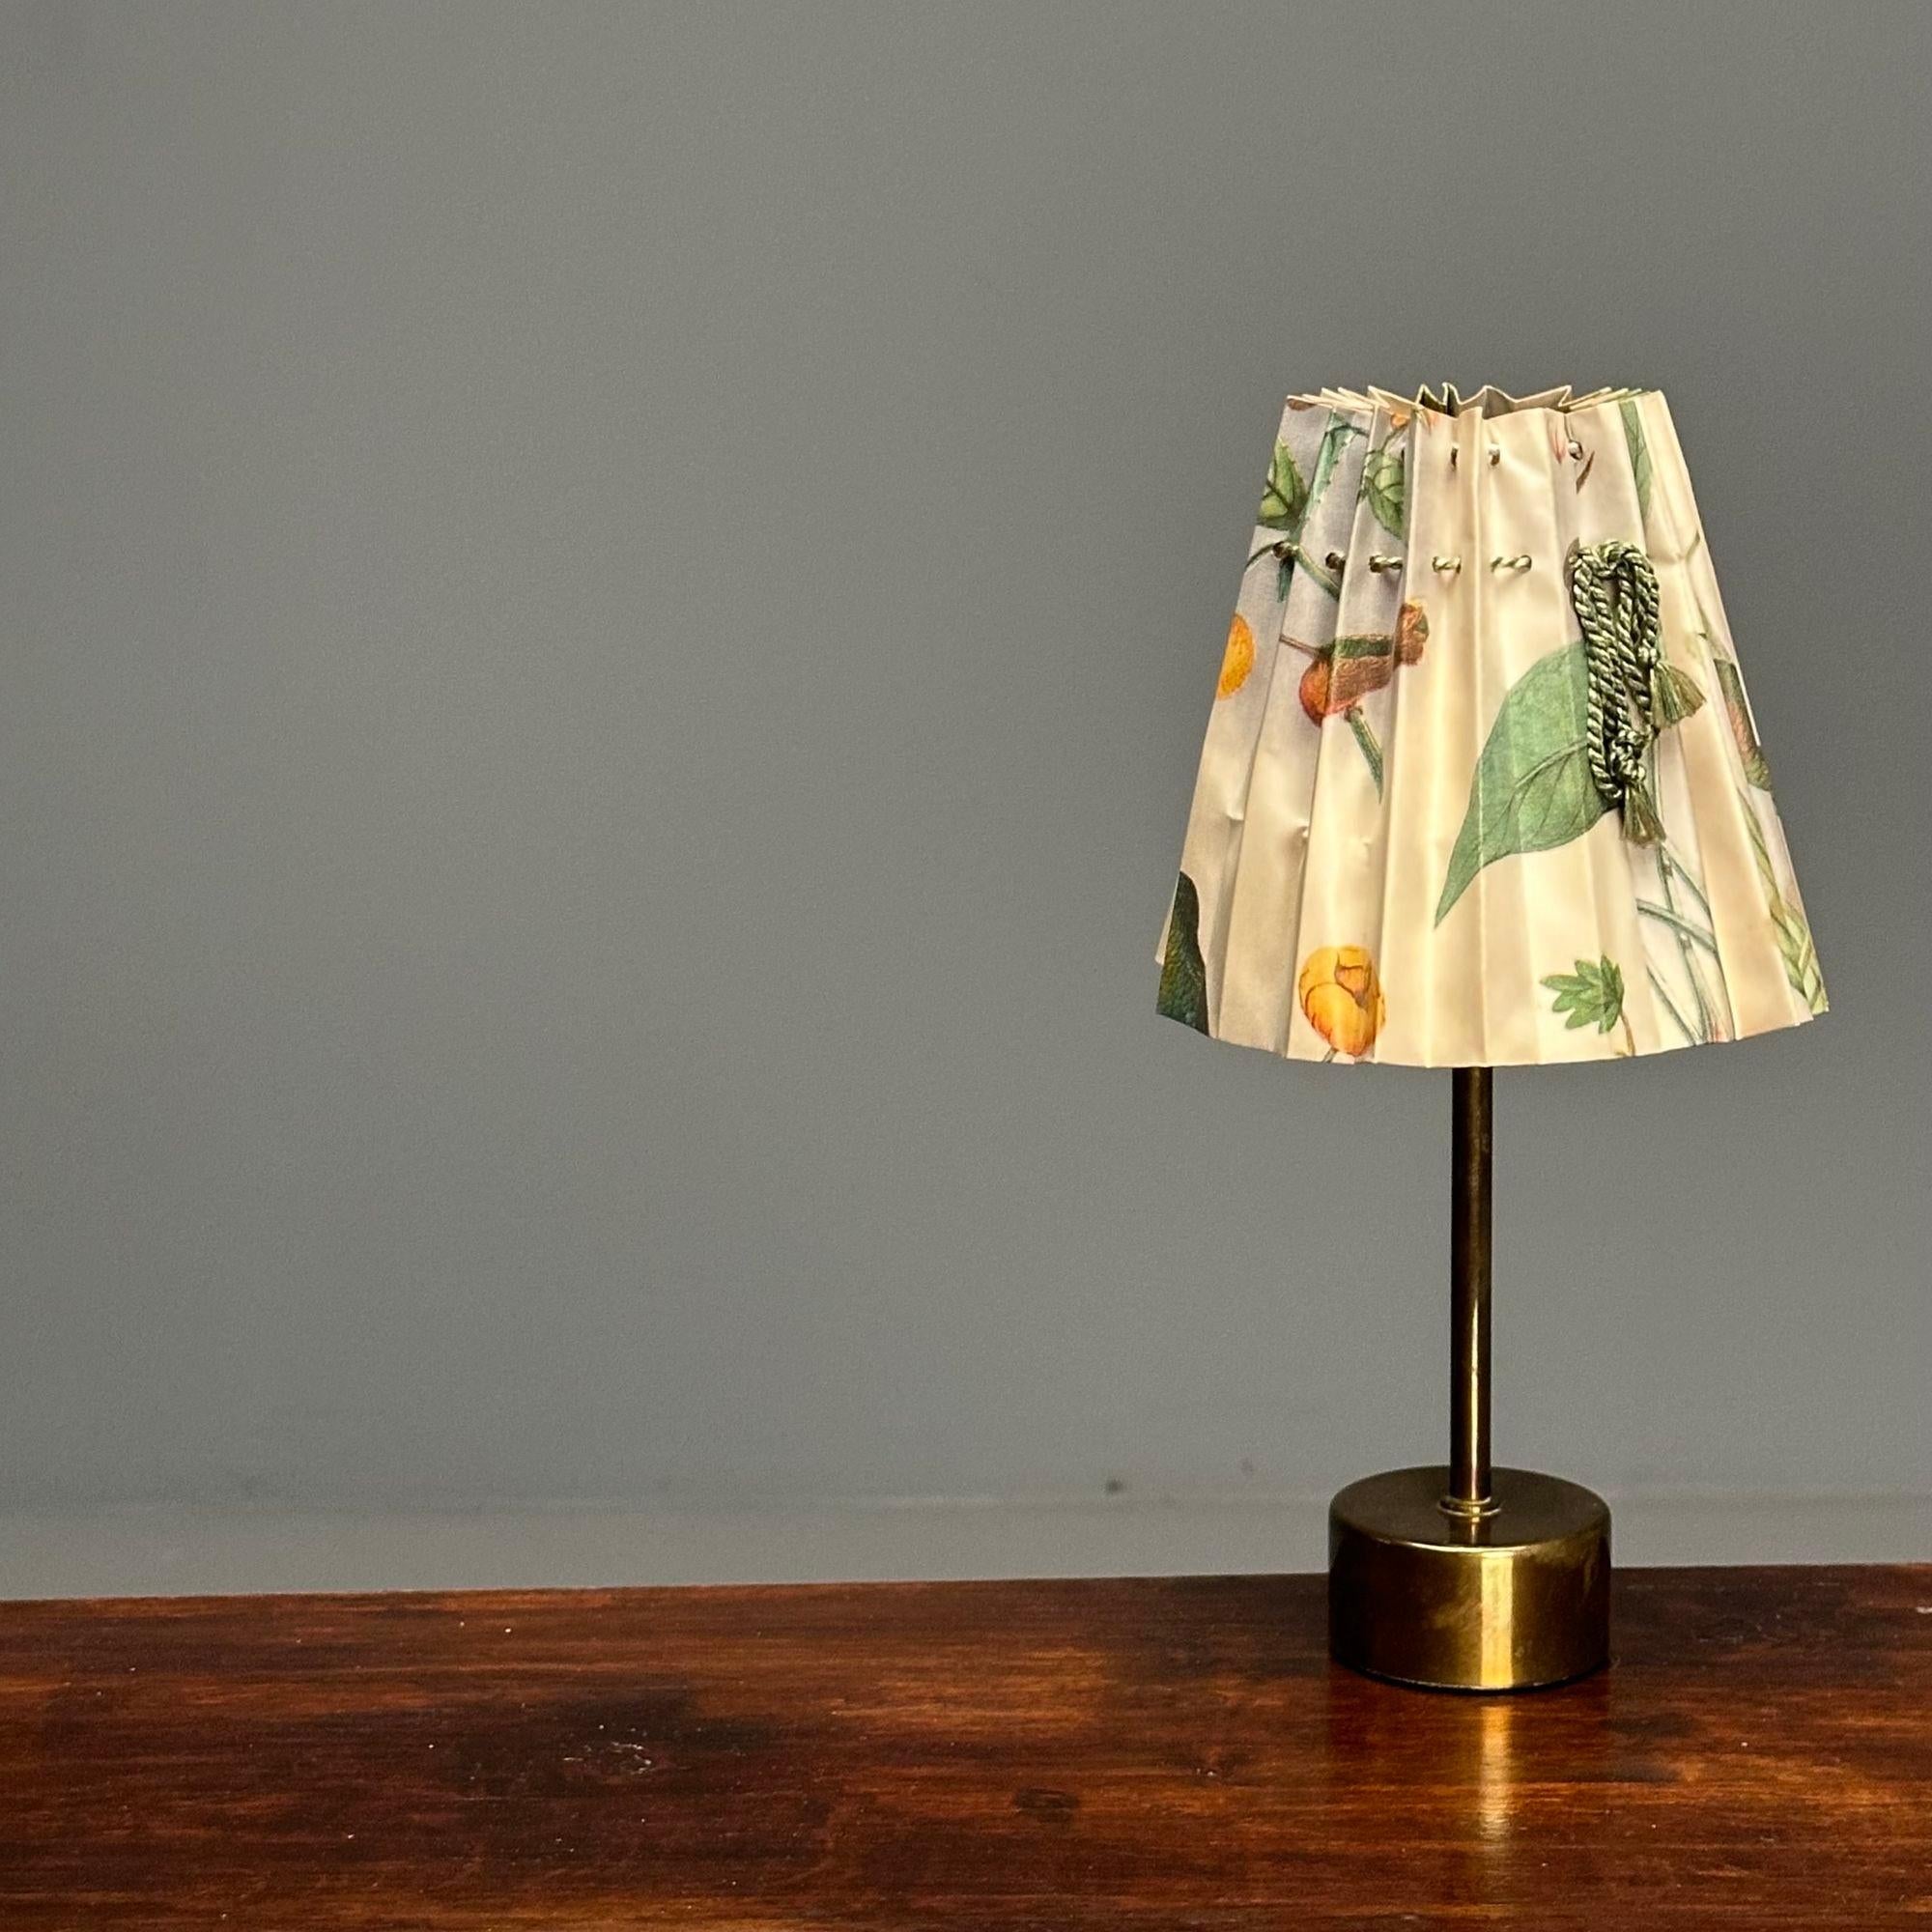 Mid-20th Century ASEA, Swedish Mid-Century Modern Table Lamps, Brass, Floral Shades, Sweden 1950s For Sale